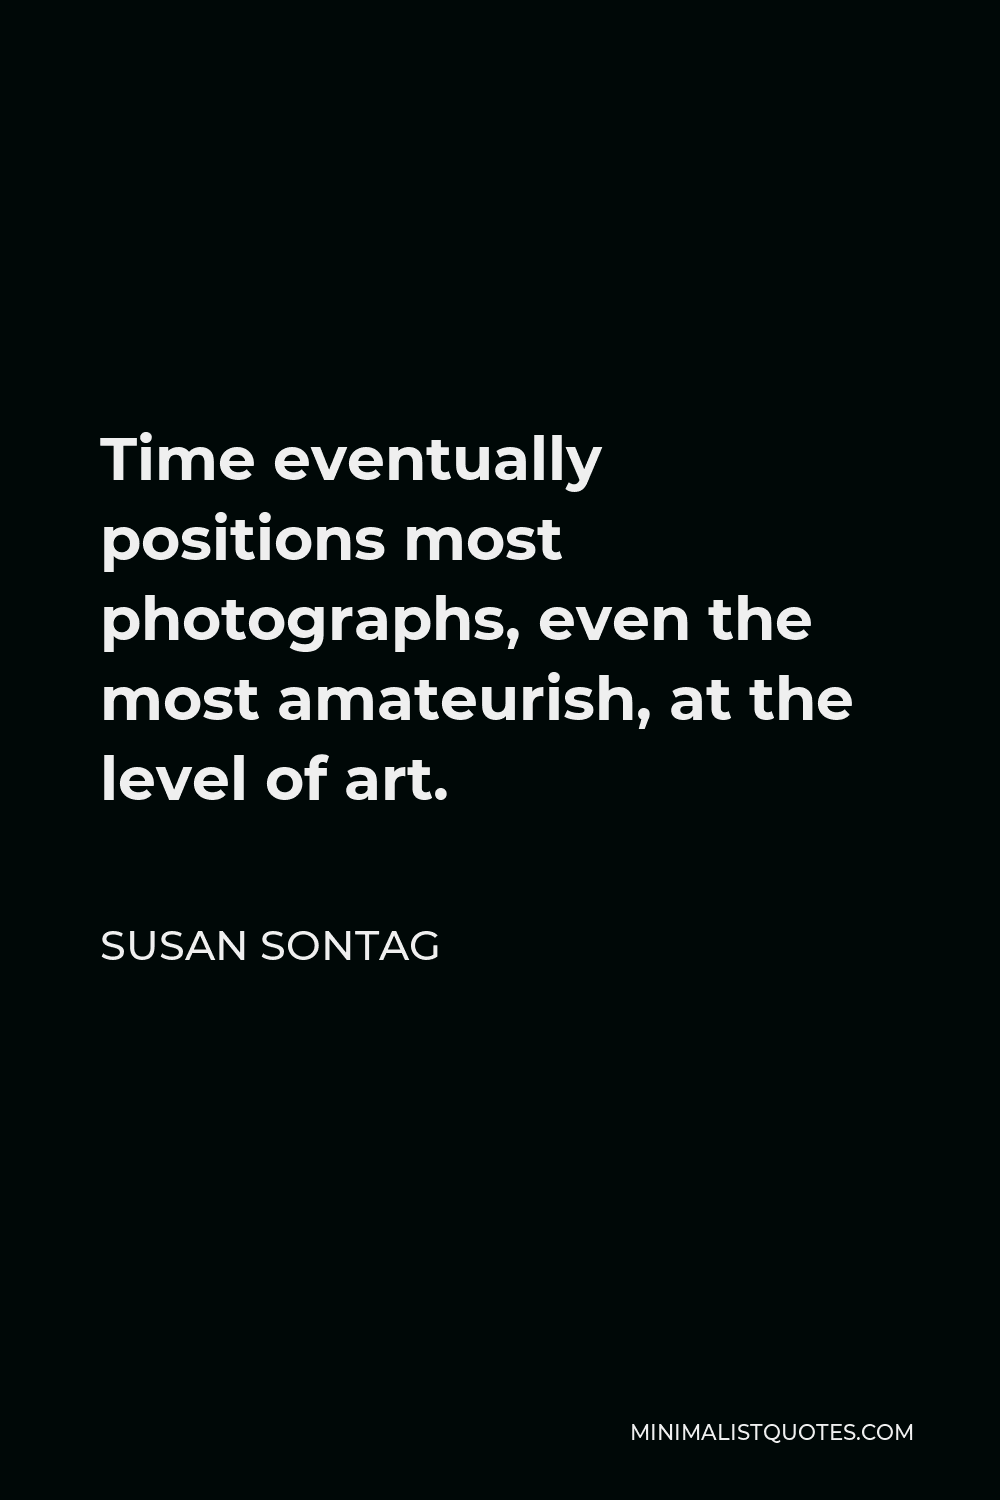 Susan Sontag Quote - Time eventually positions most photographs, even the most amateurish, at the level of art.